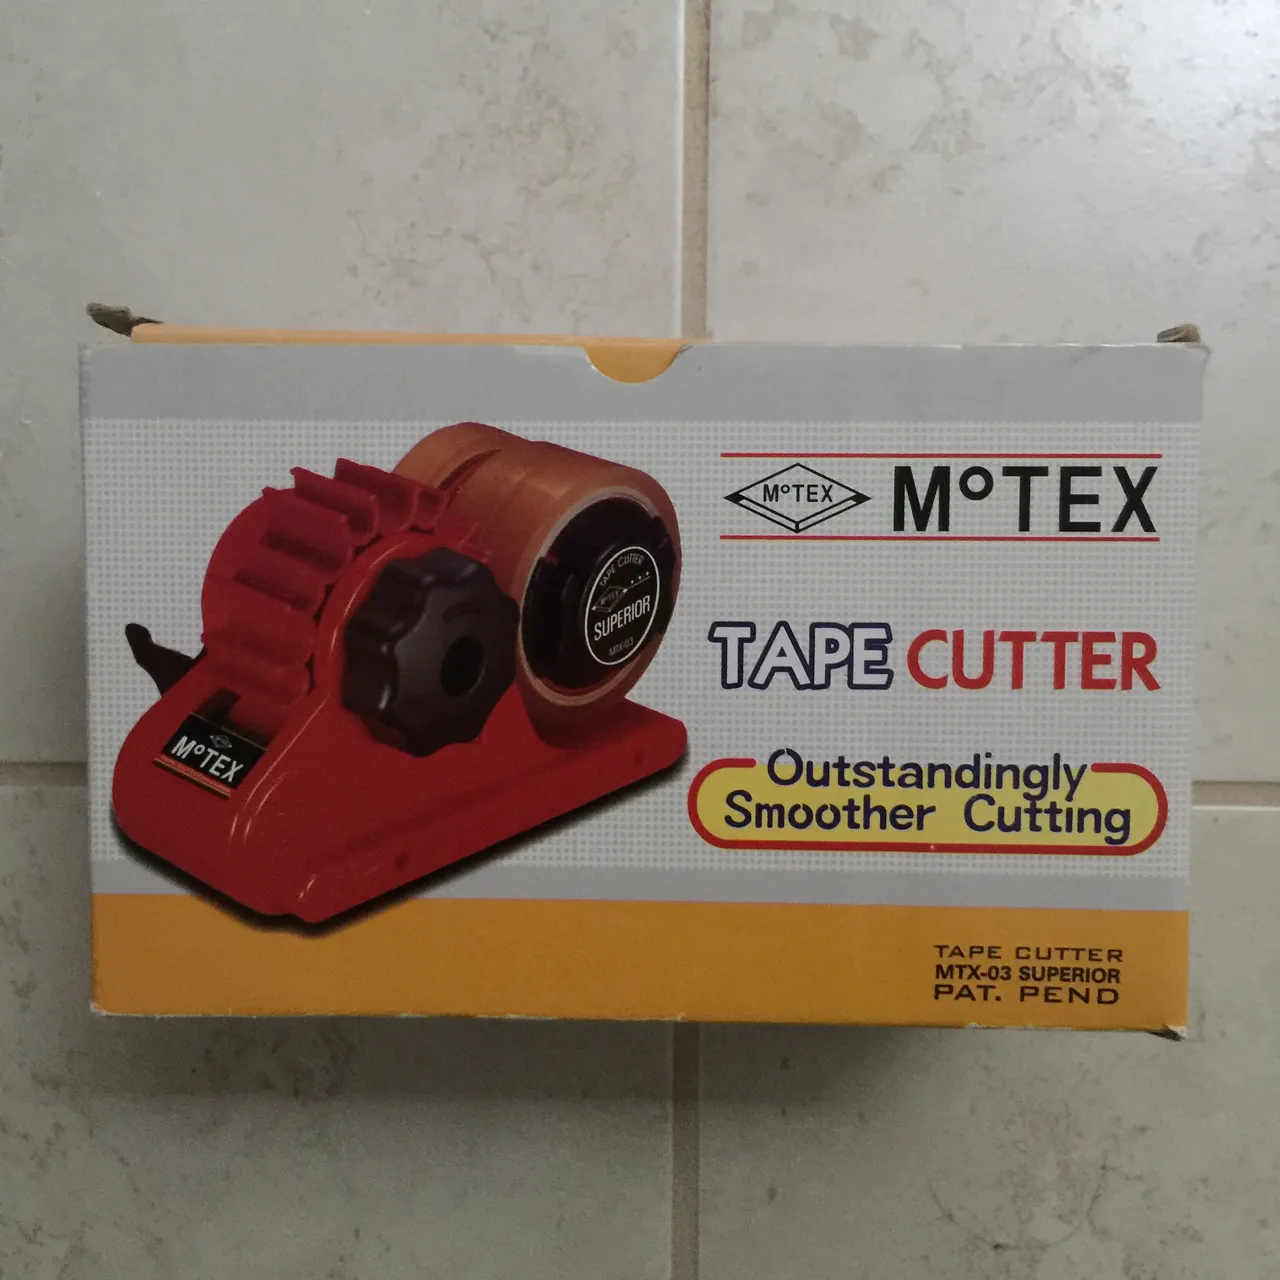 Motex Superior Smooth Tape Cutter Stationary Dispenser photo 1